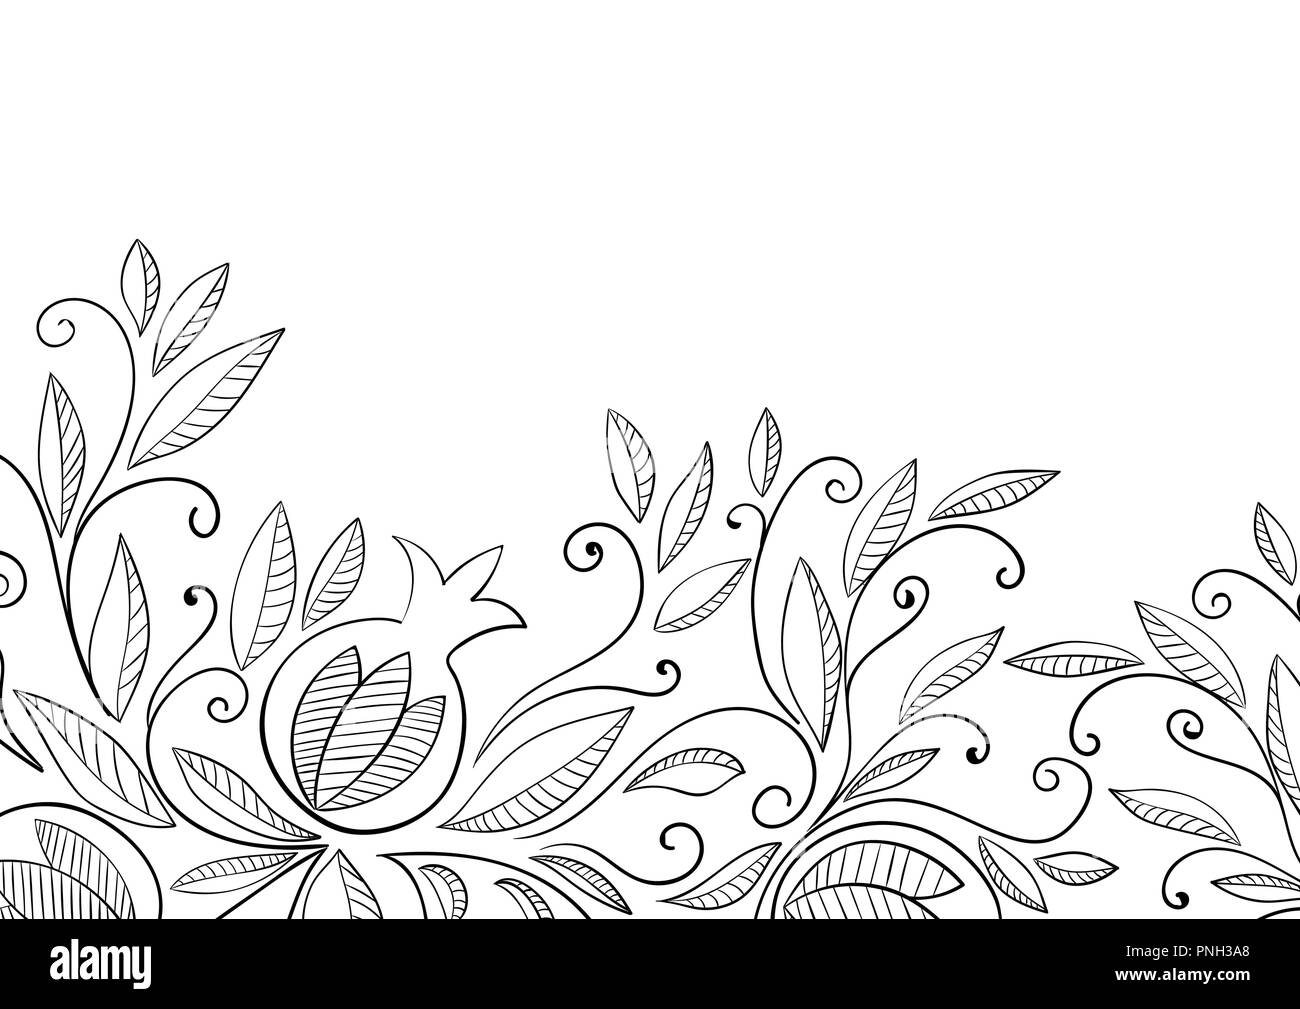 Pomegranate background. Black and white linear vector illustration. Adult coloring page. Stock Vector